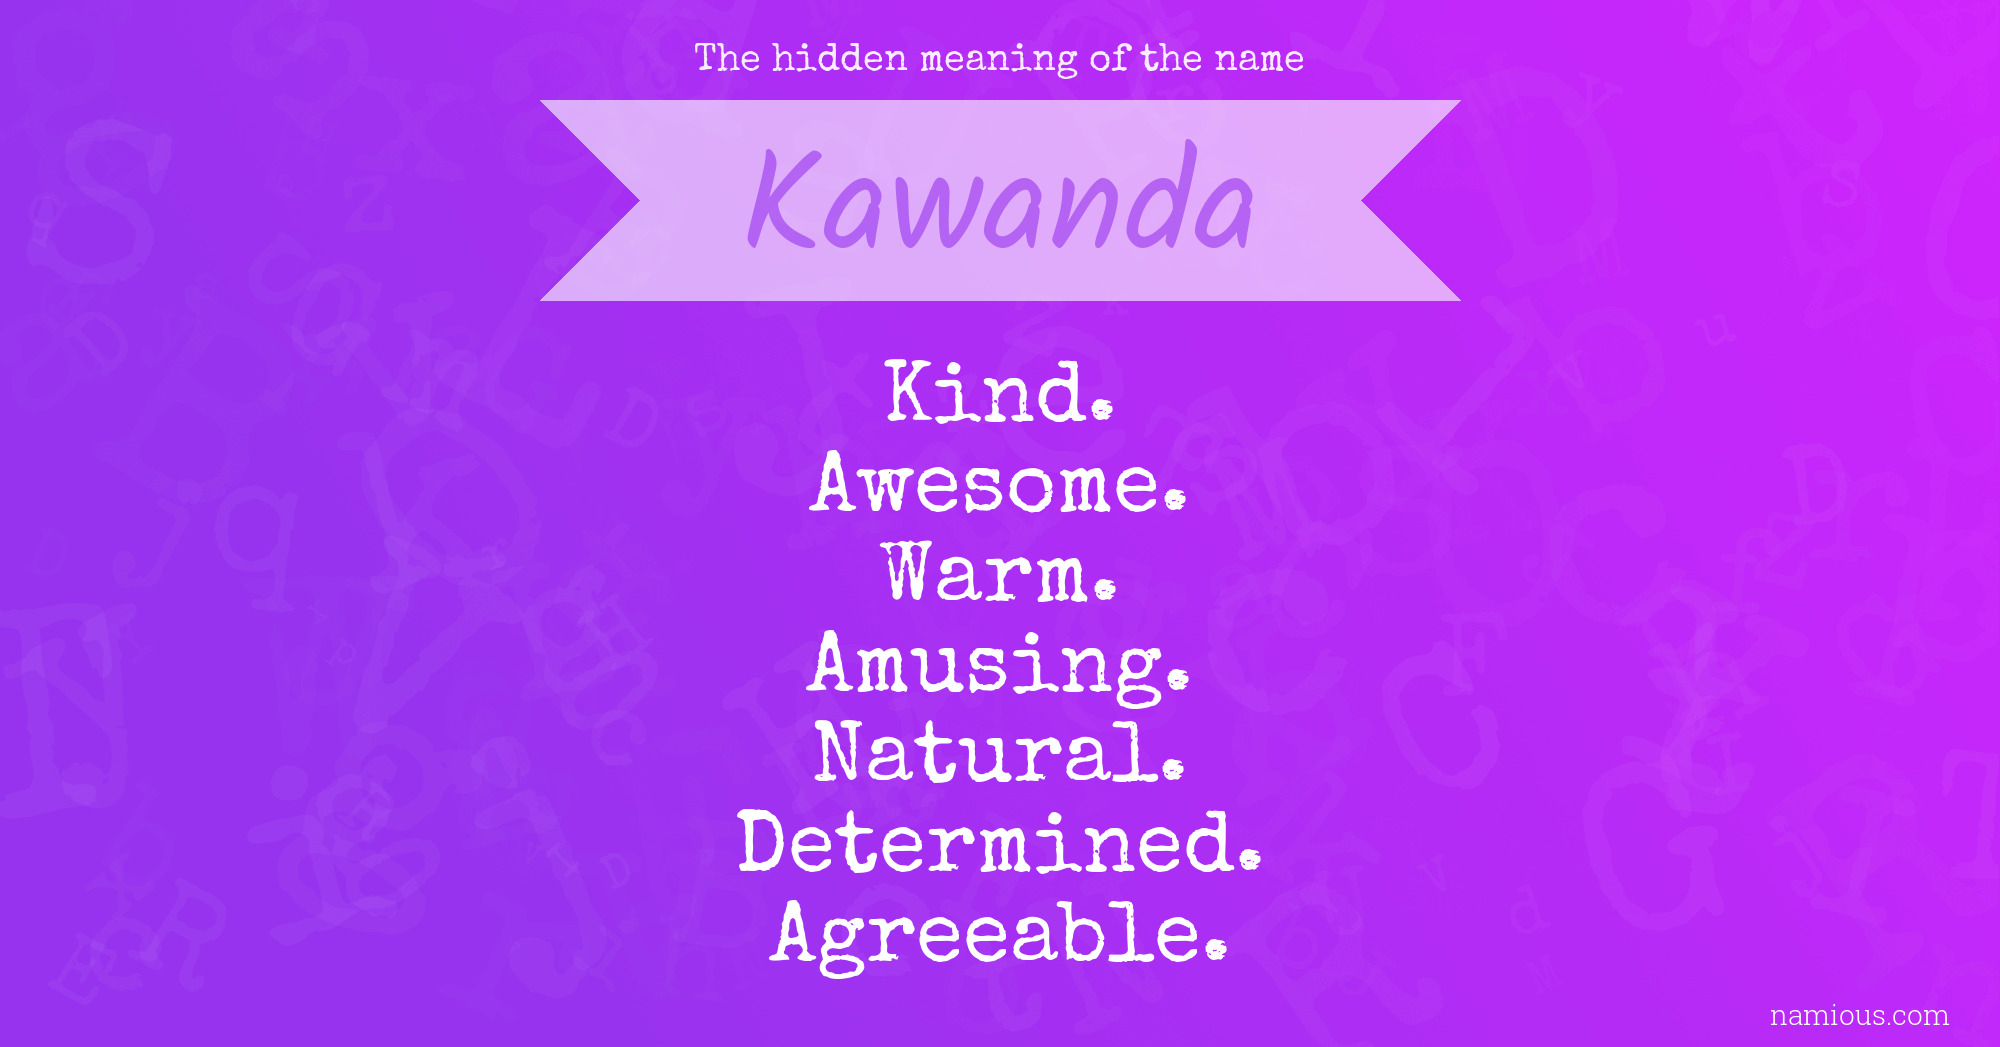 The hidden meaning of the name Kawanda